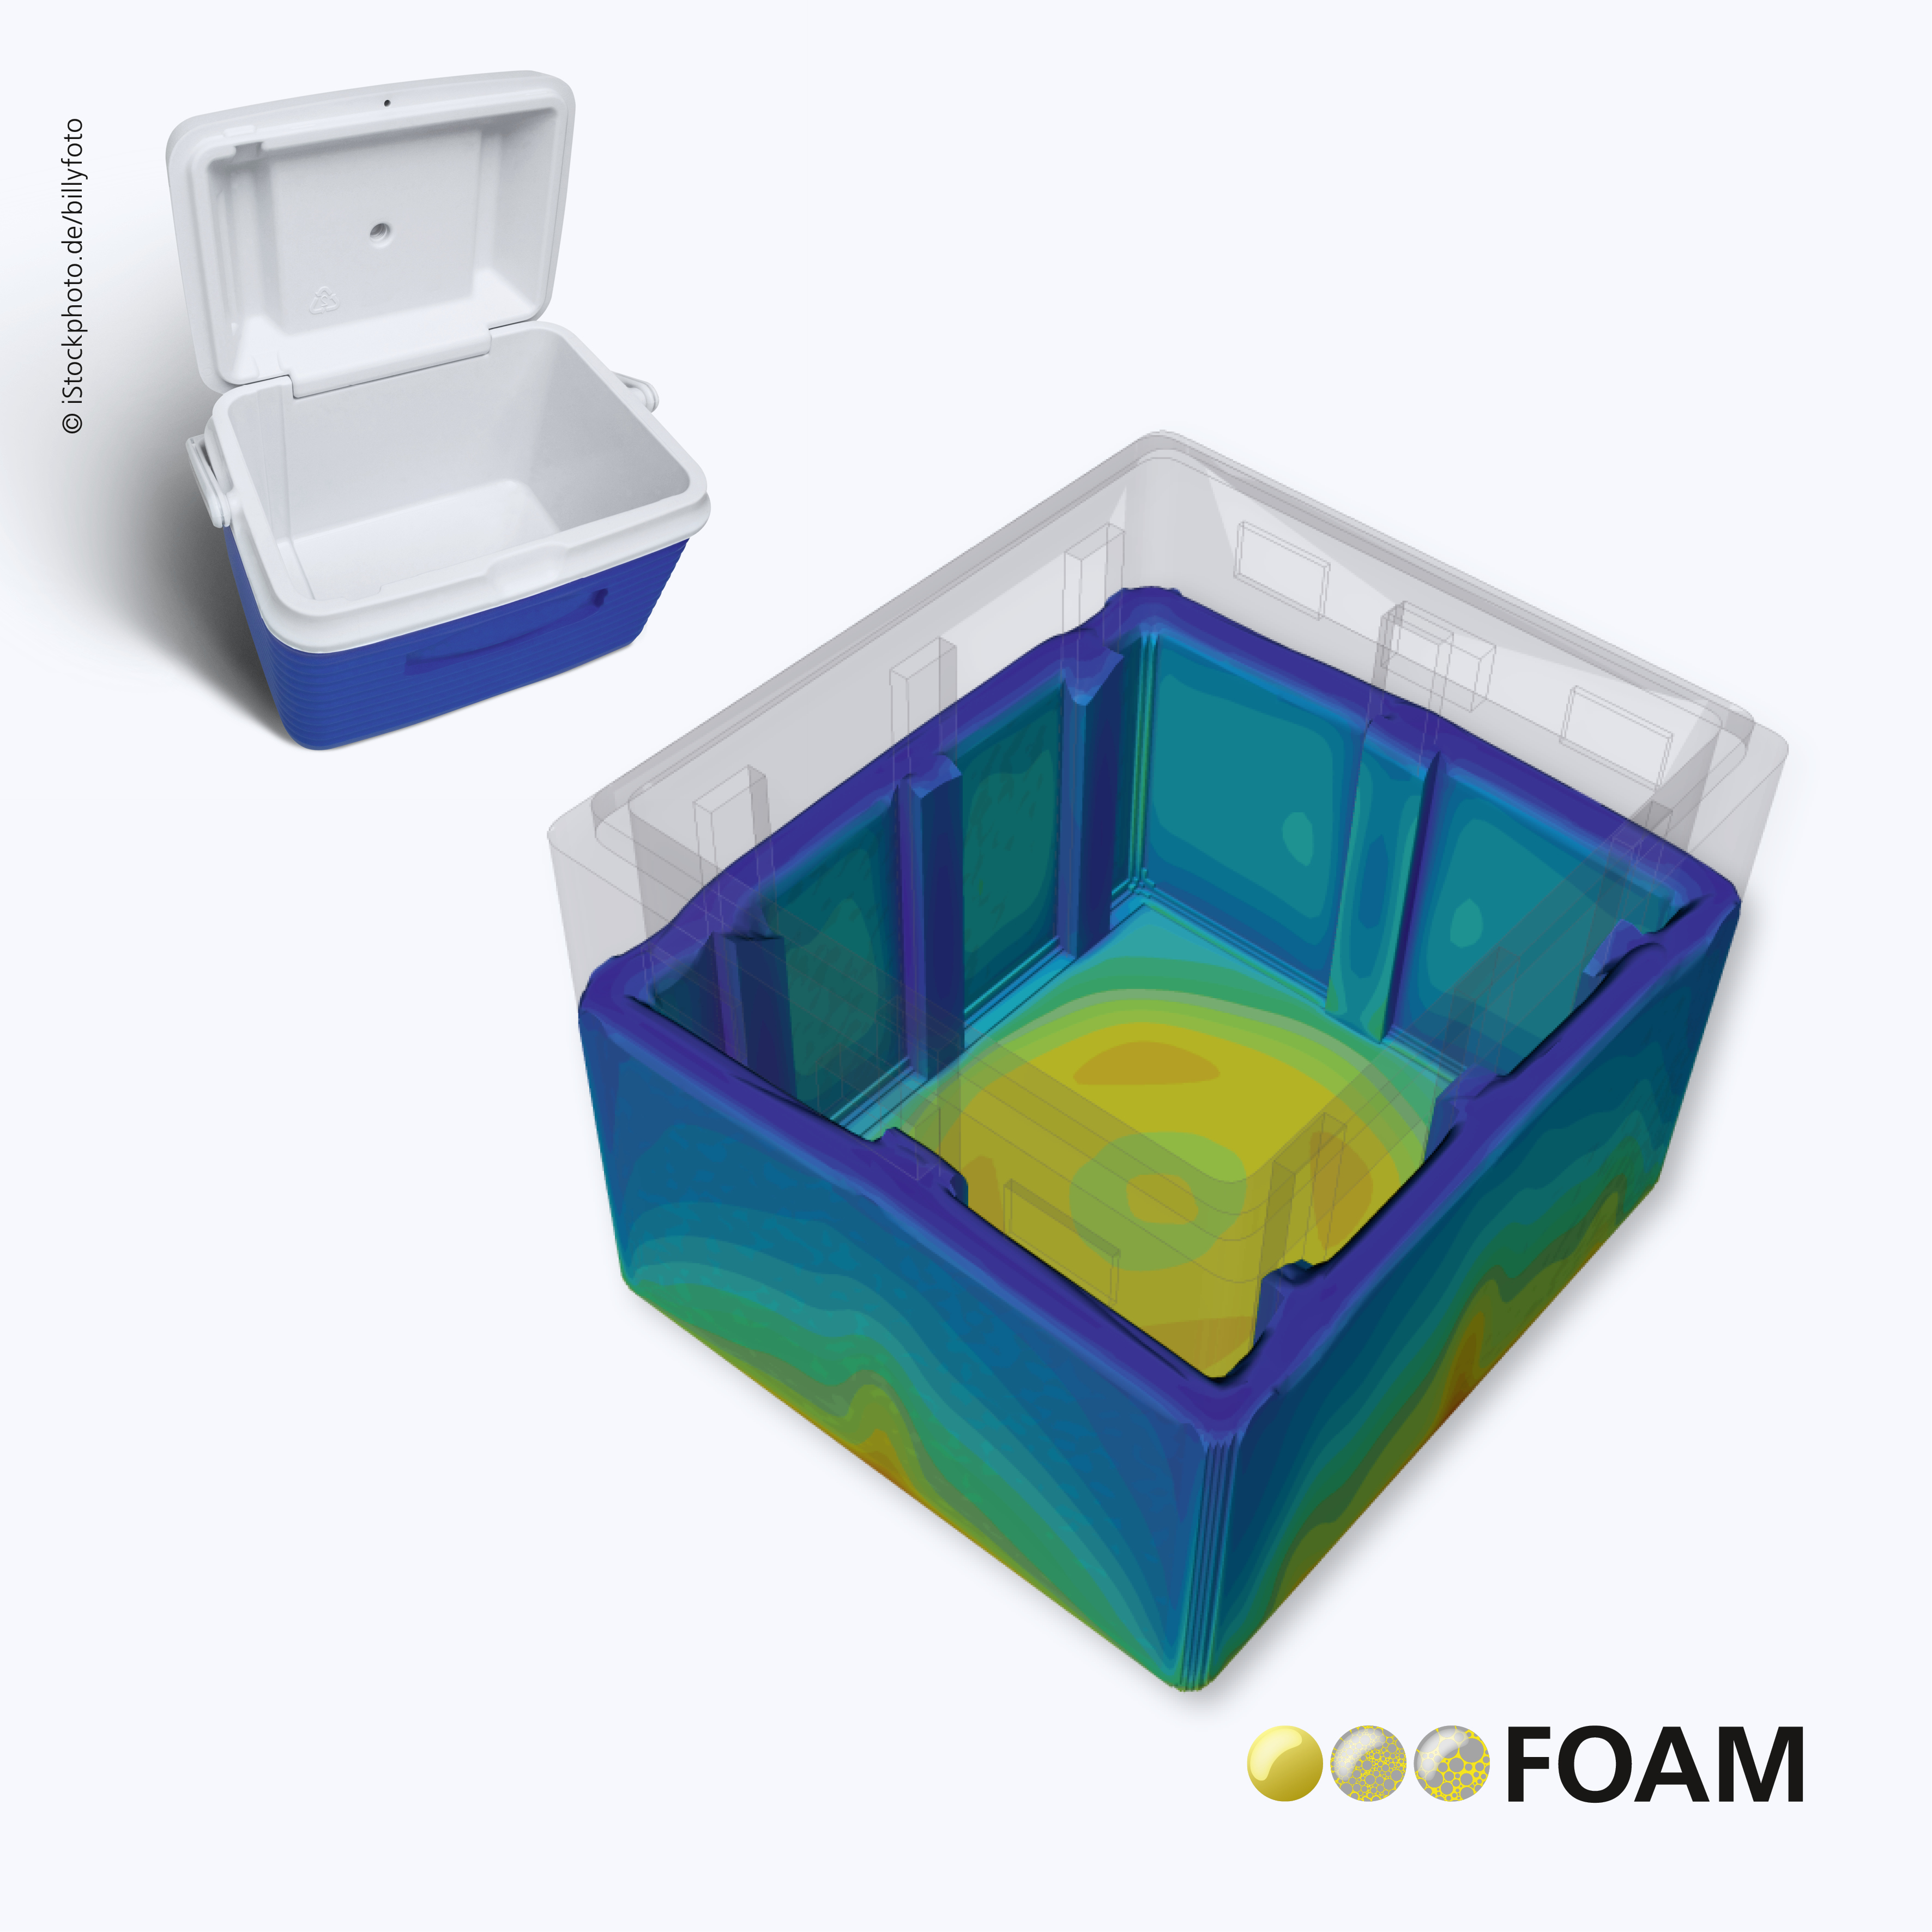 PU expansion simulation with FOAM for the production of a cool box.